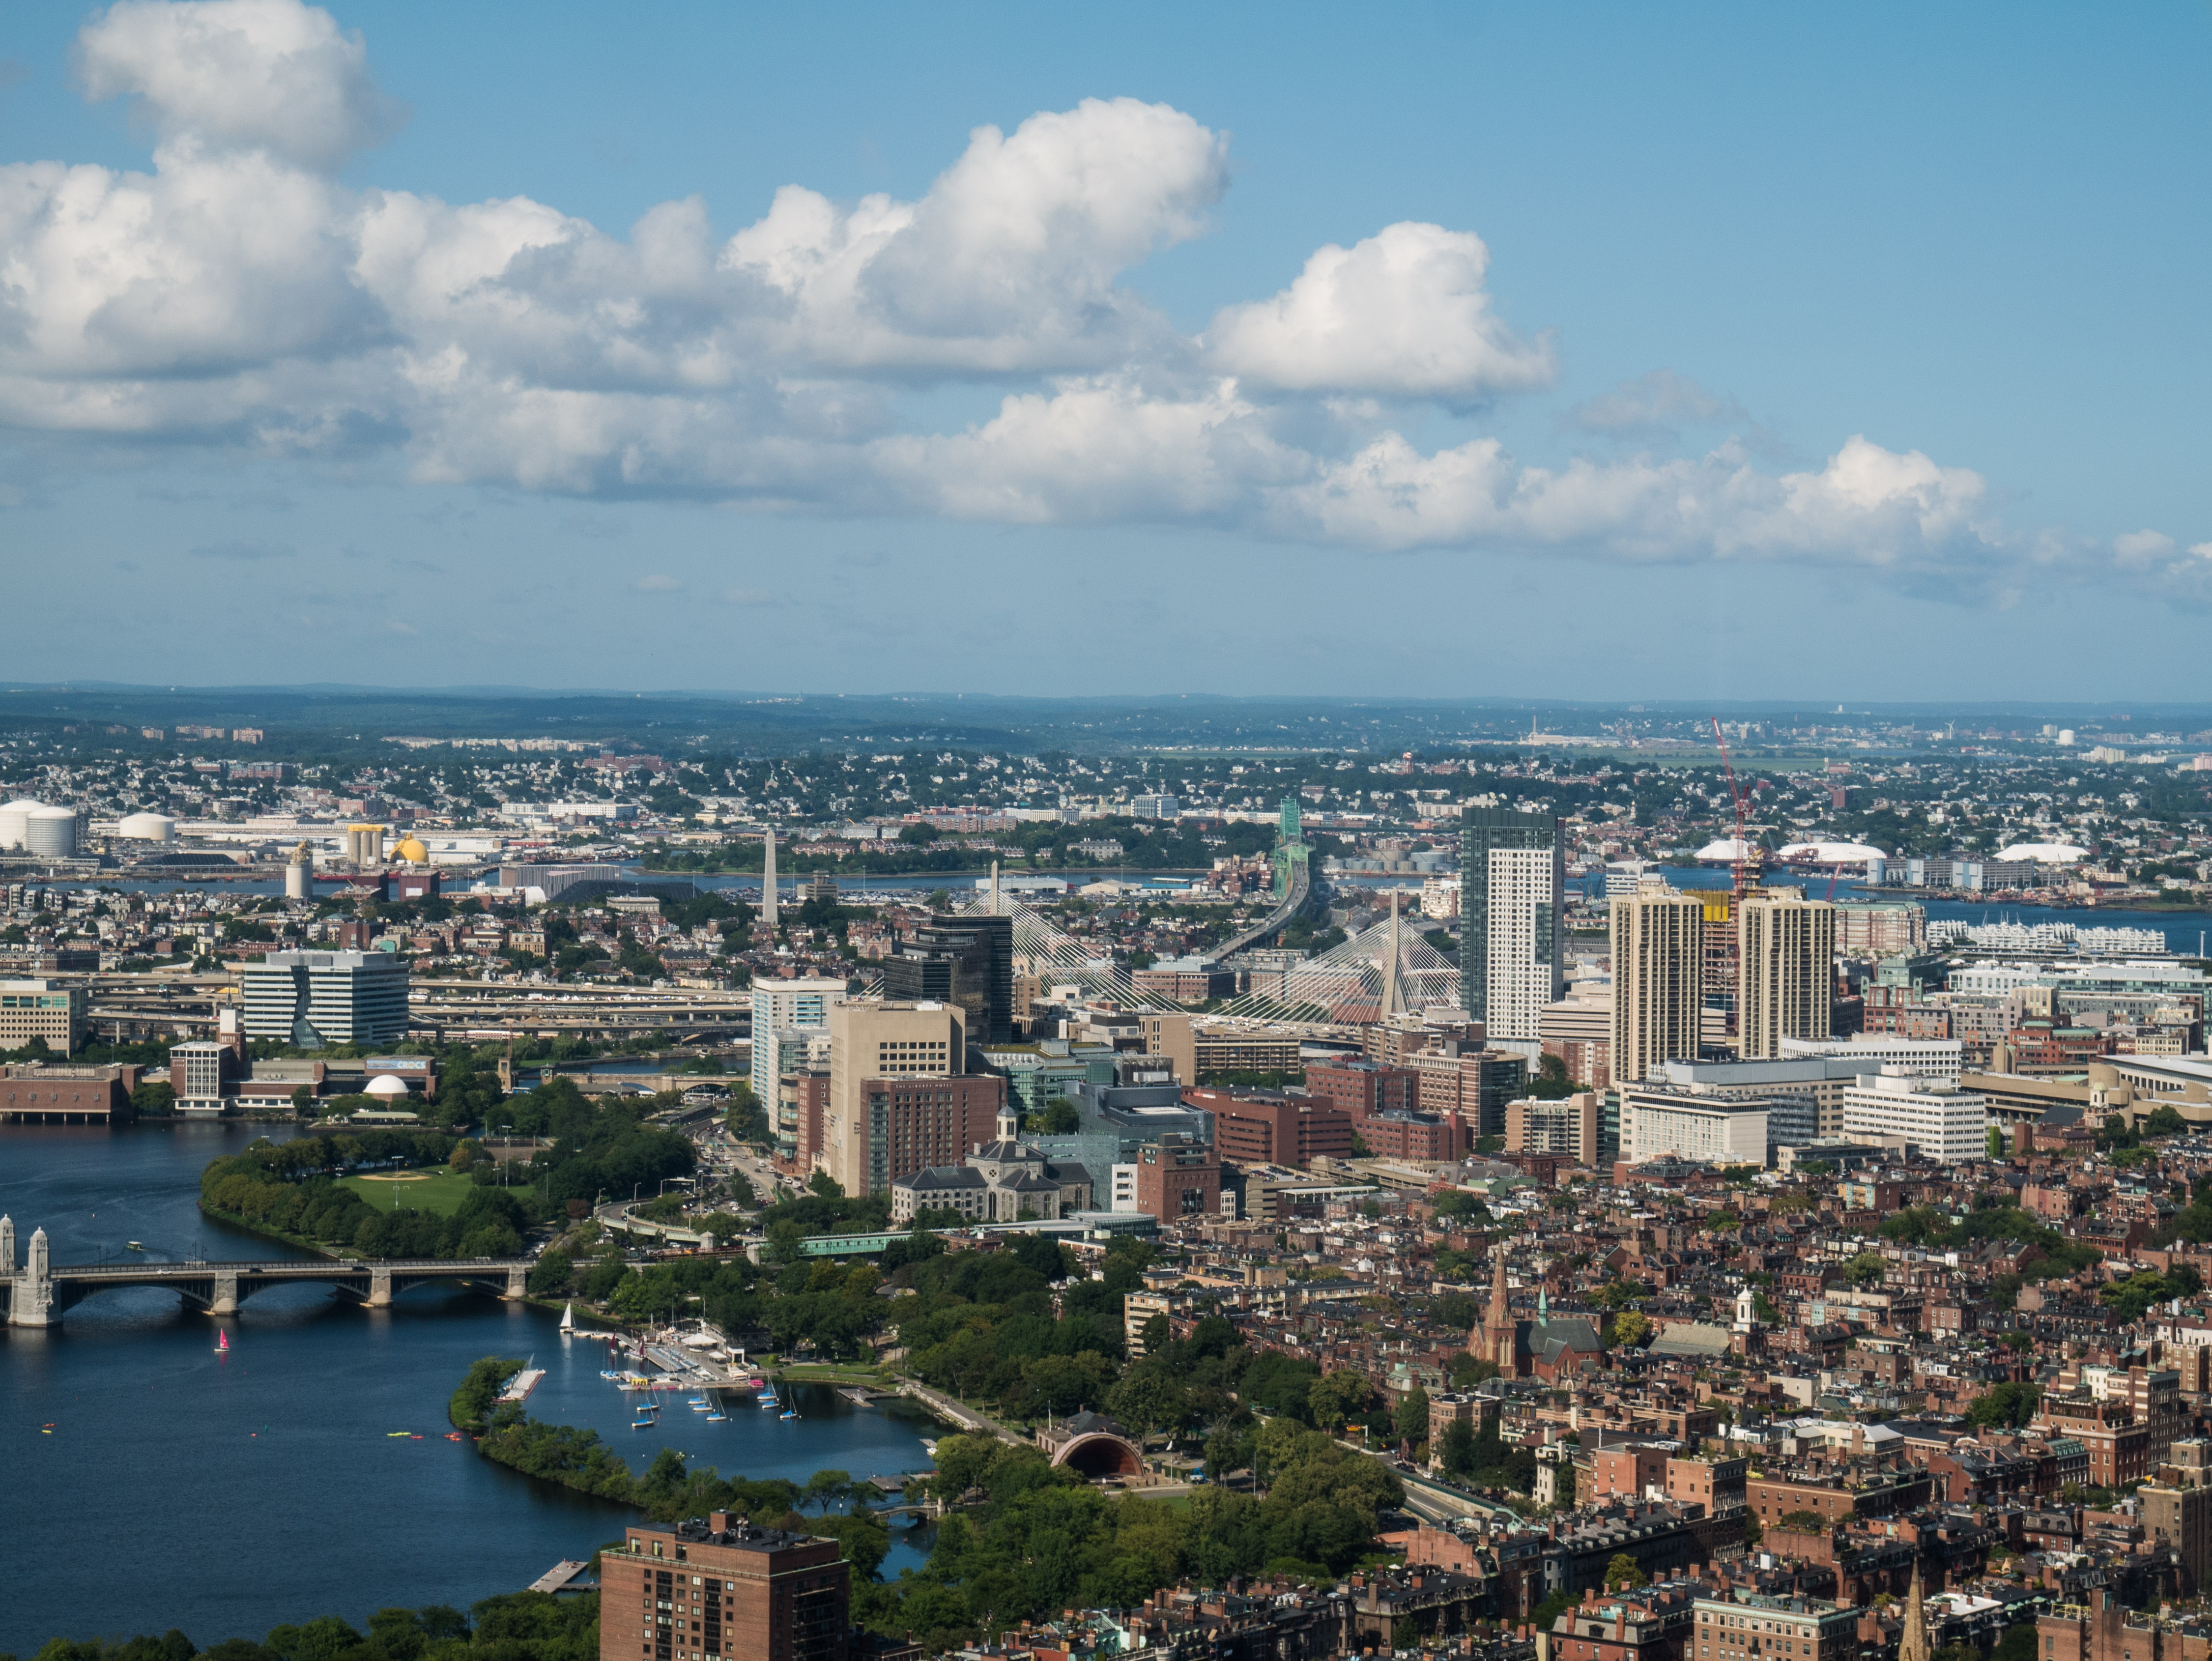 View of Boston from the Skywalk Observatory